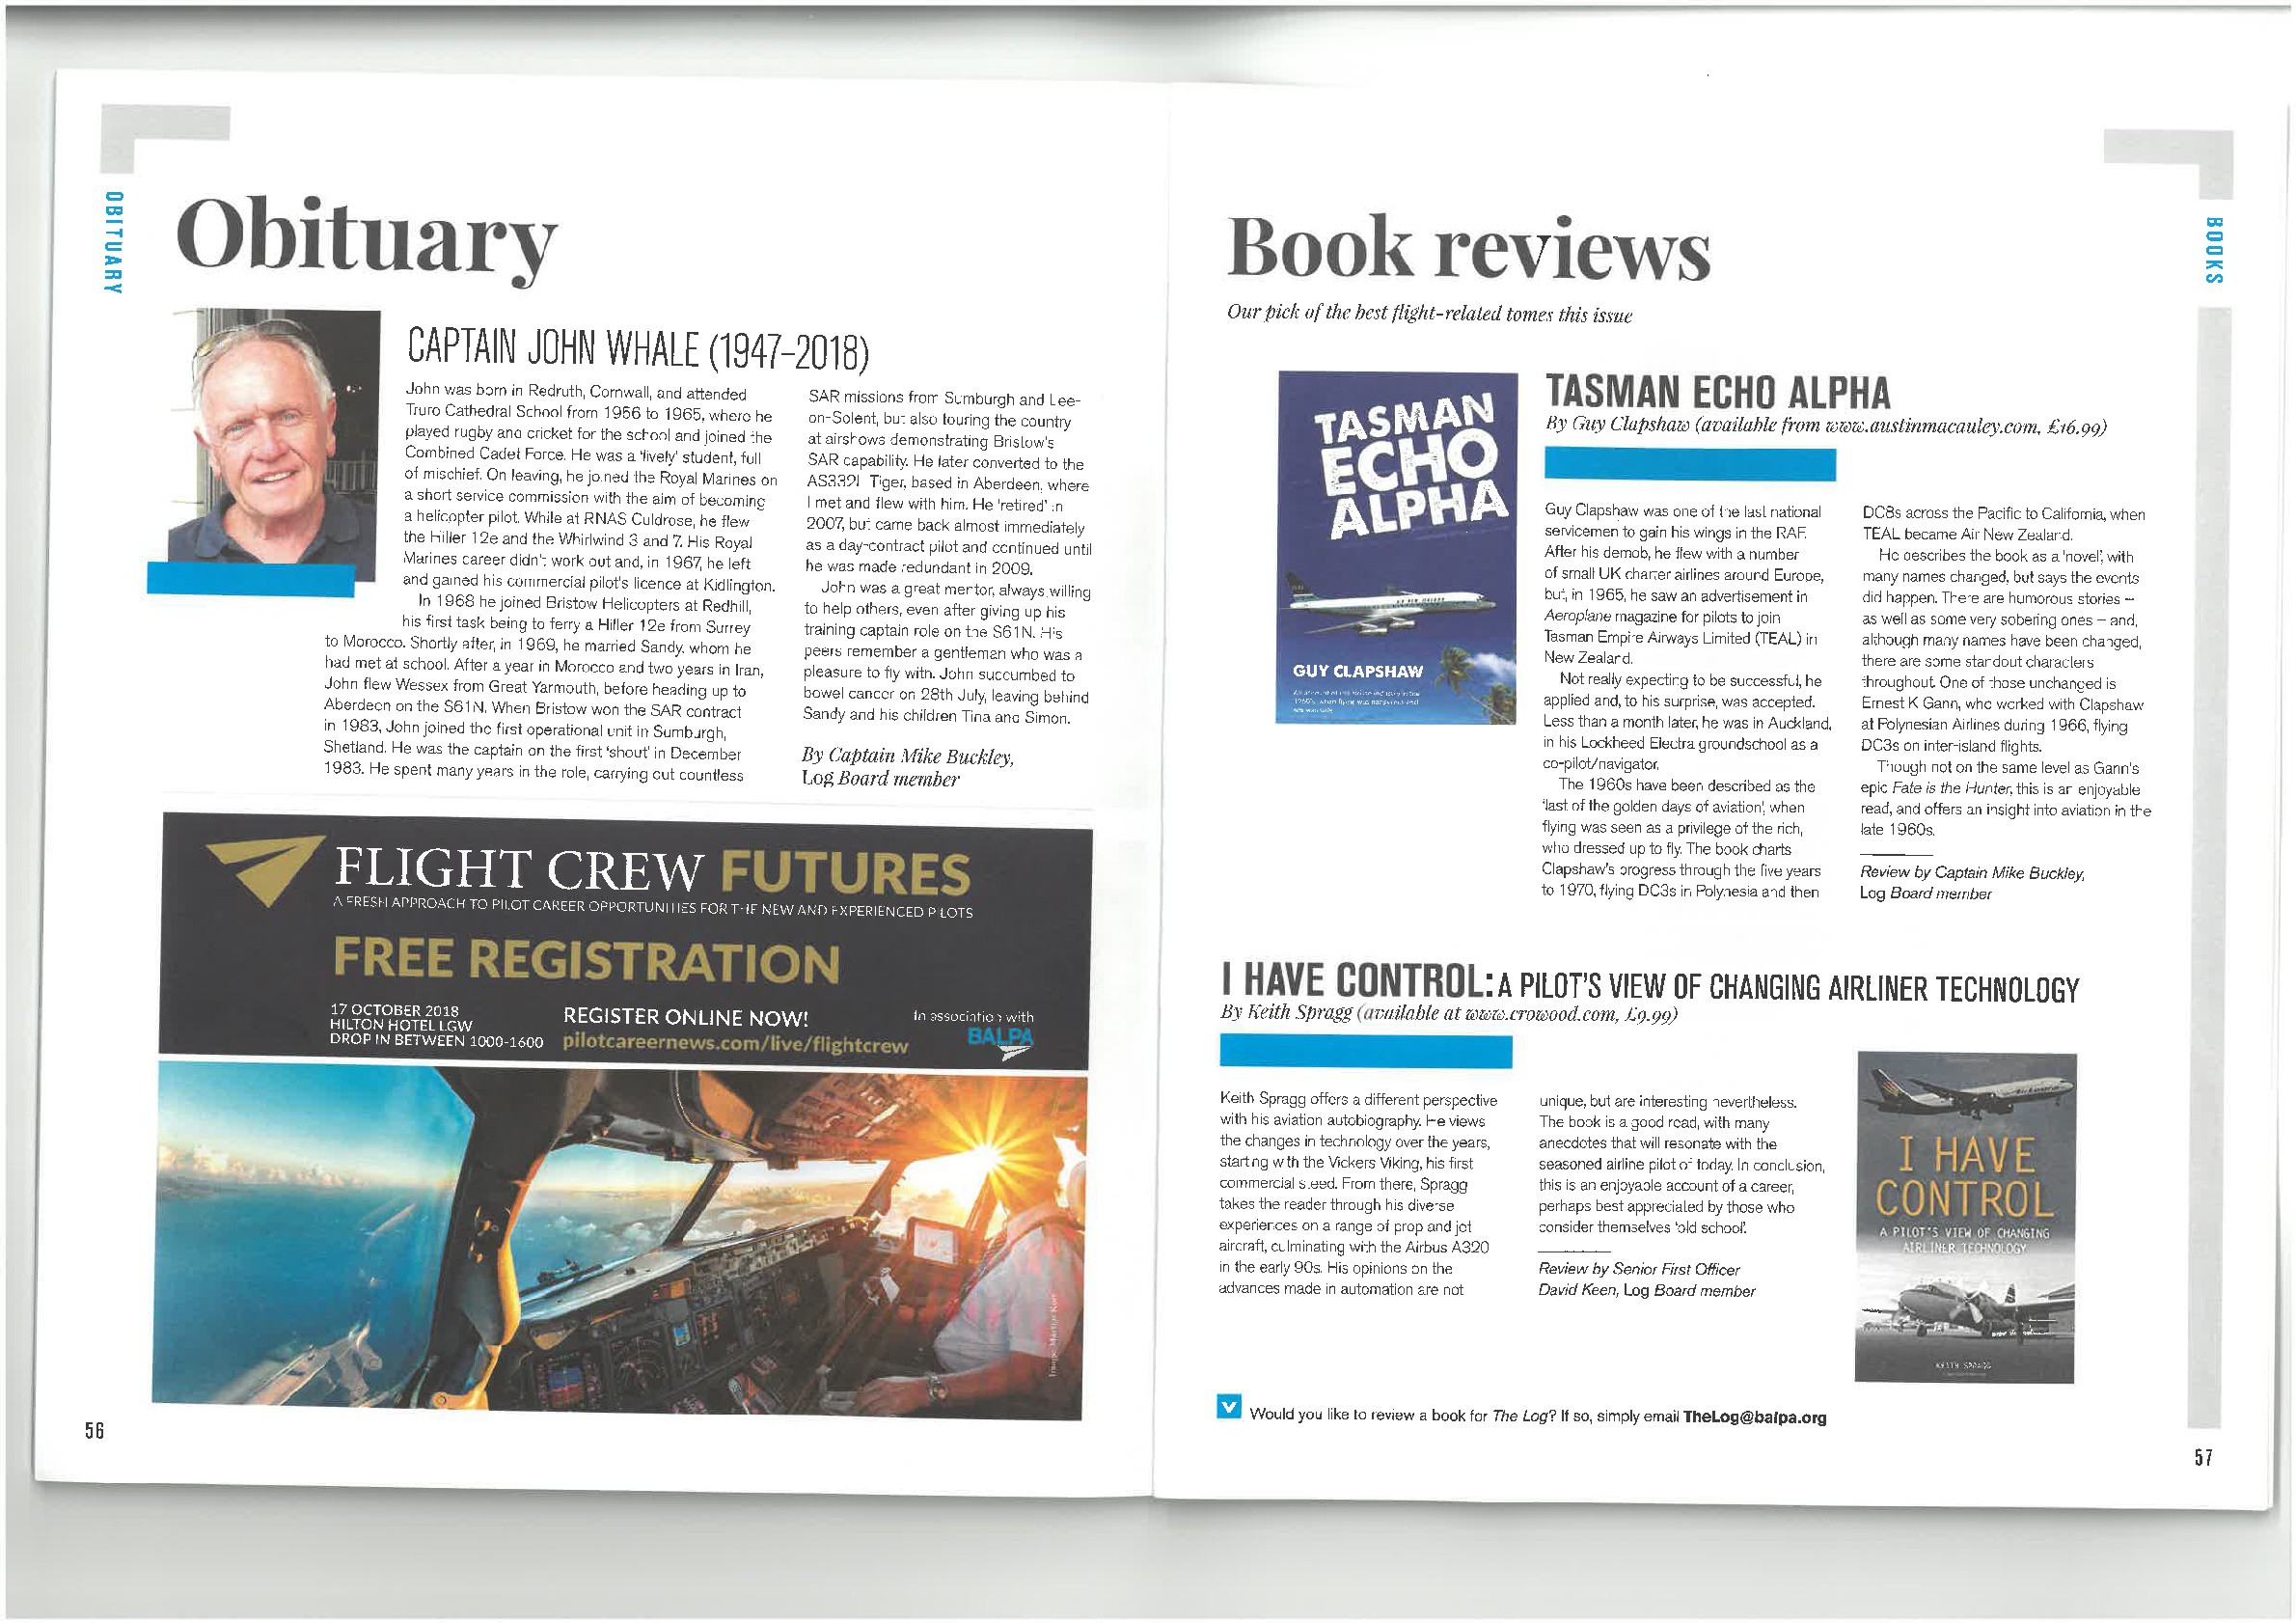 Book Review of ‘Tasman Echo Alpha’ by British Airline Pilots Association Magazine, The Log